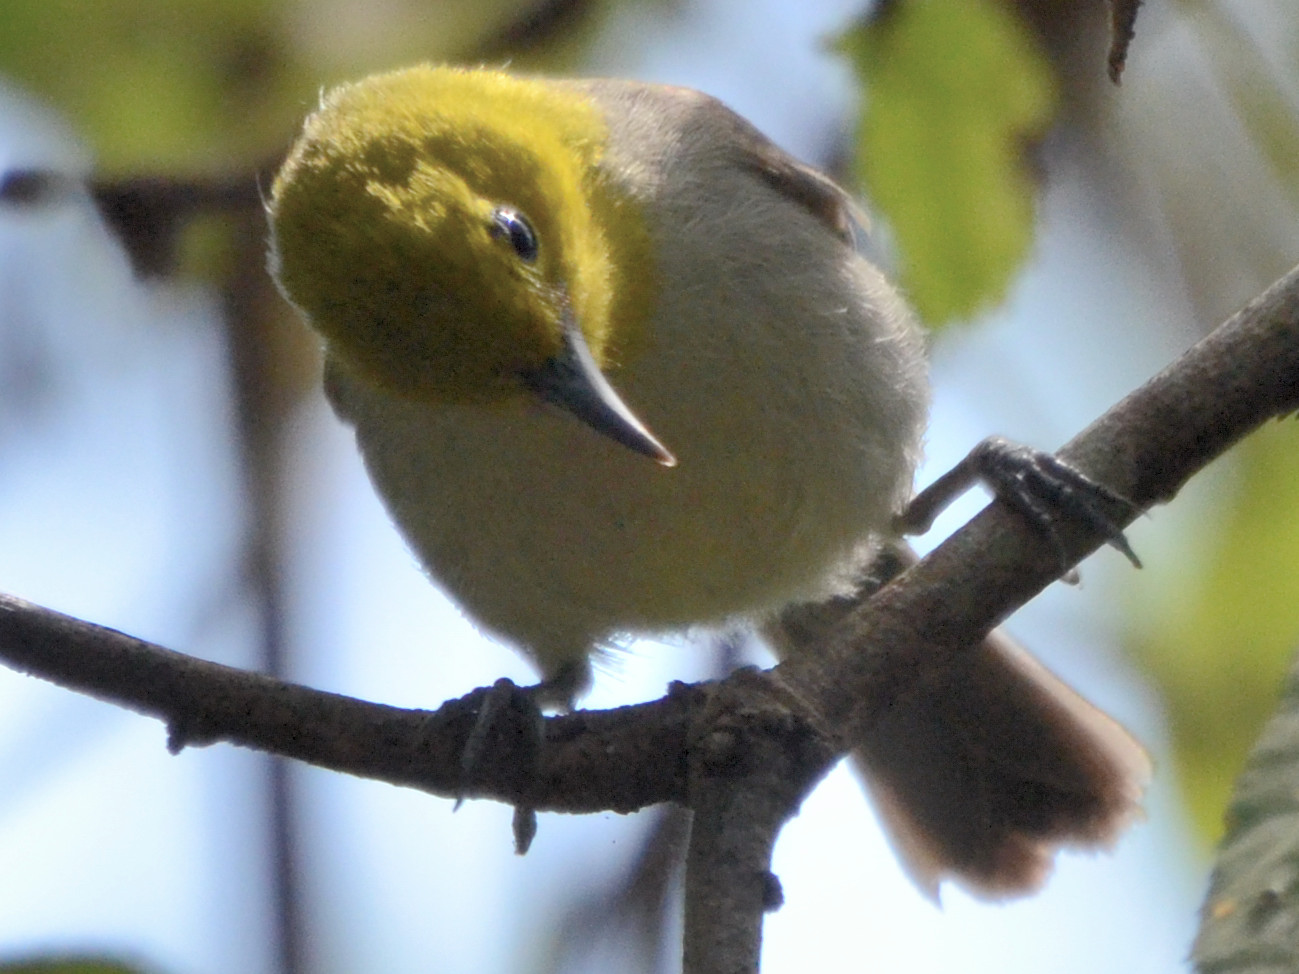 Click picture to see more Yellow-headed Warblers.